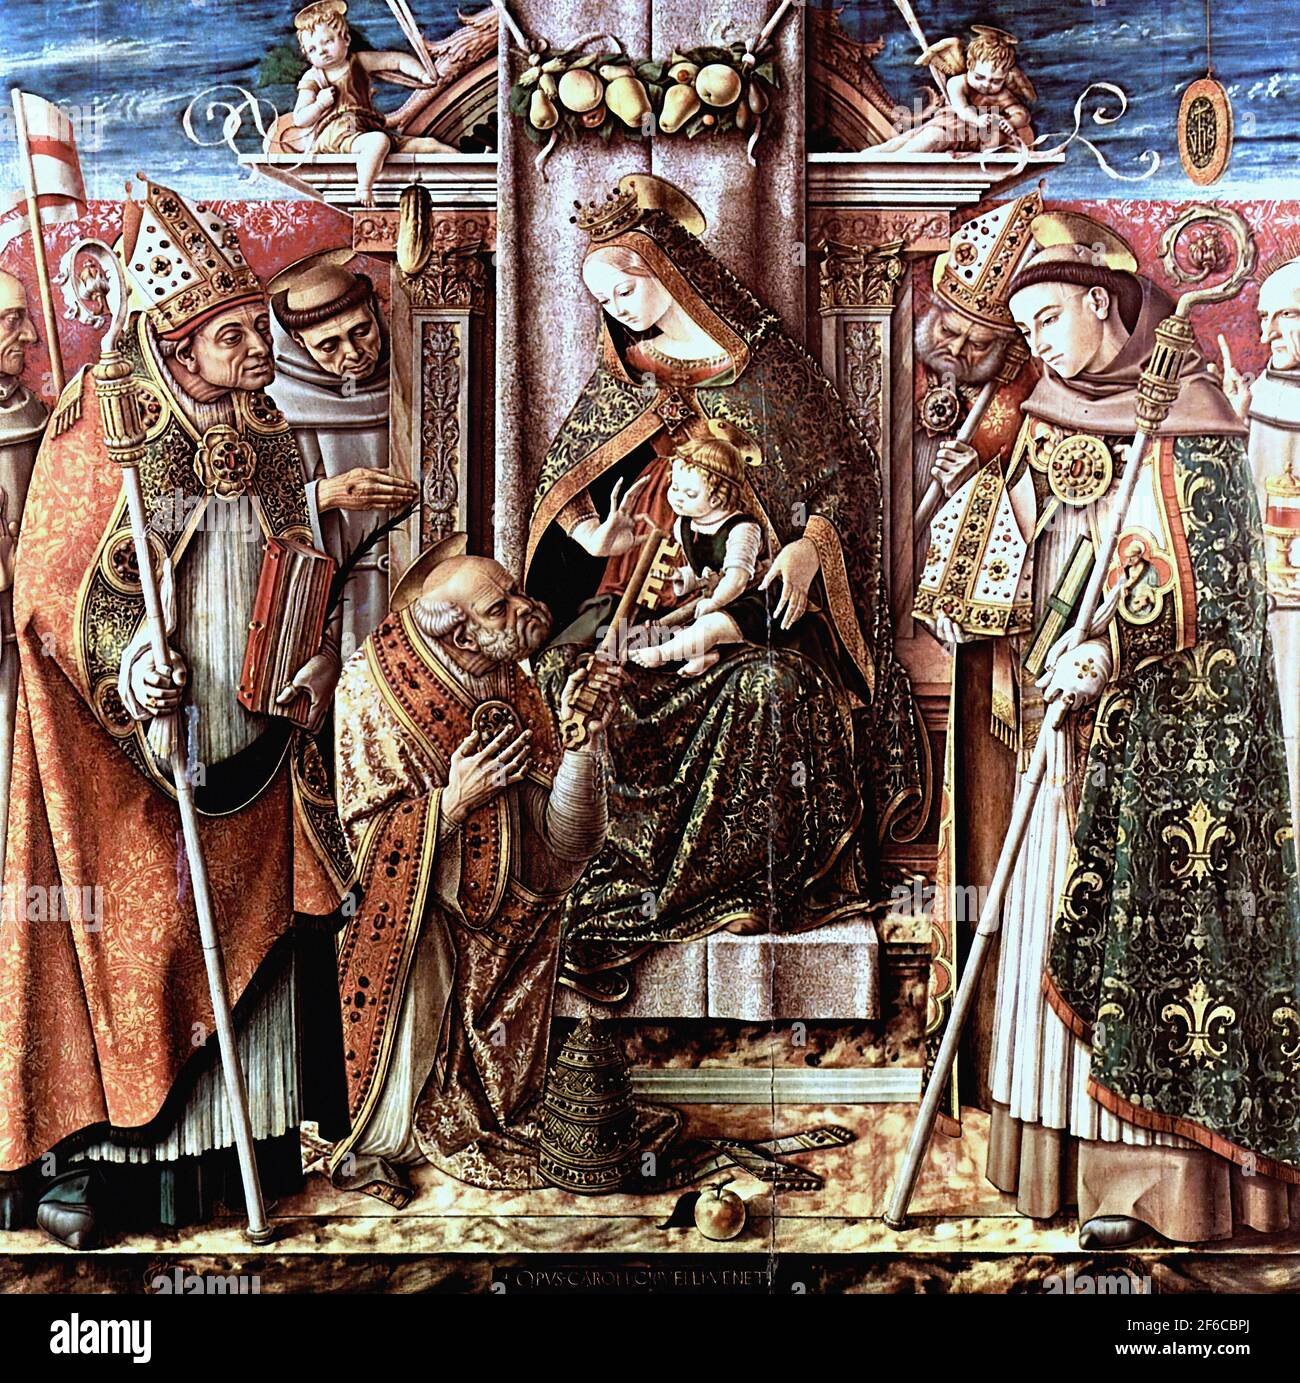 Carlo Crivelli - Virgin Child Enthroned with Saints C 1488 Stock Photo